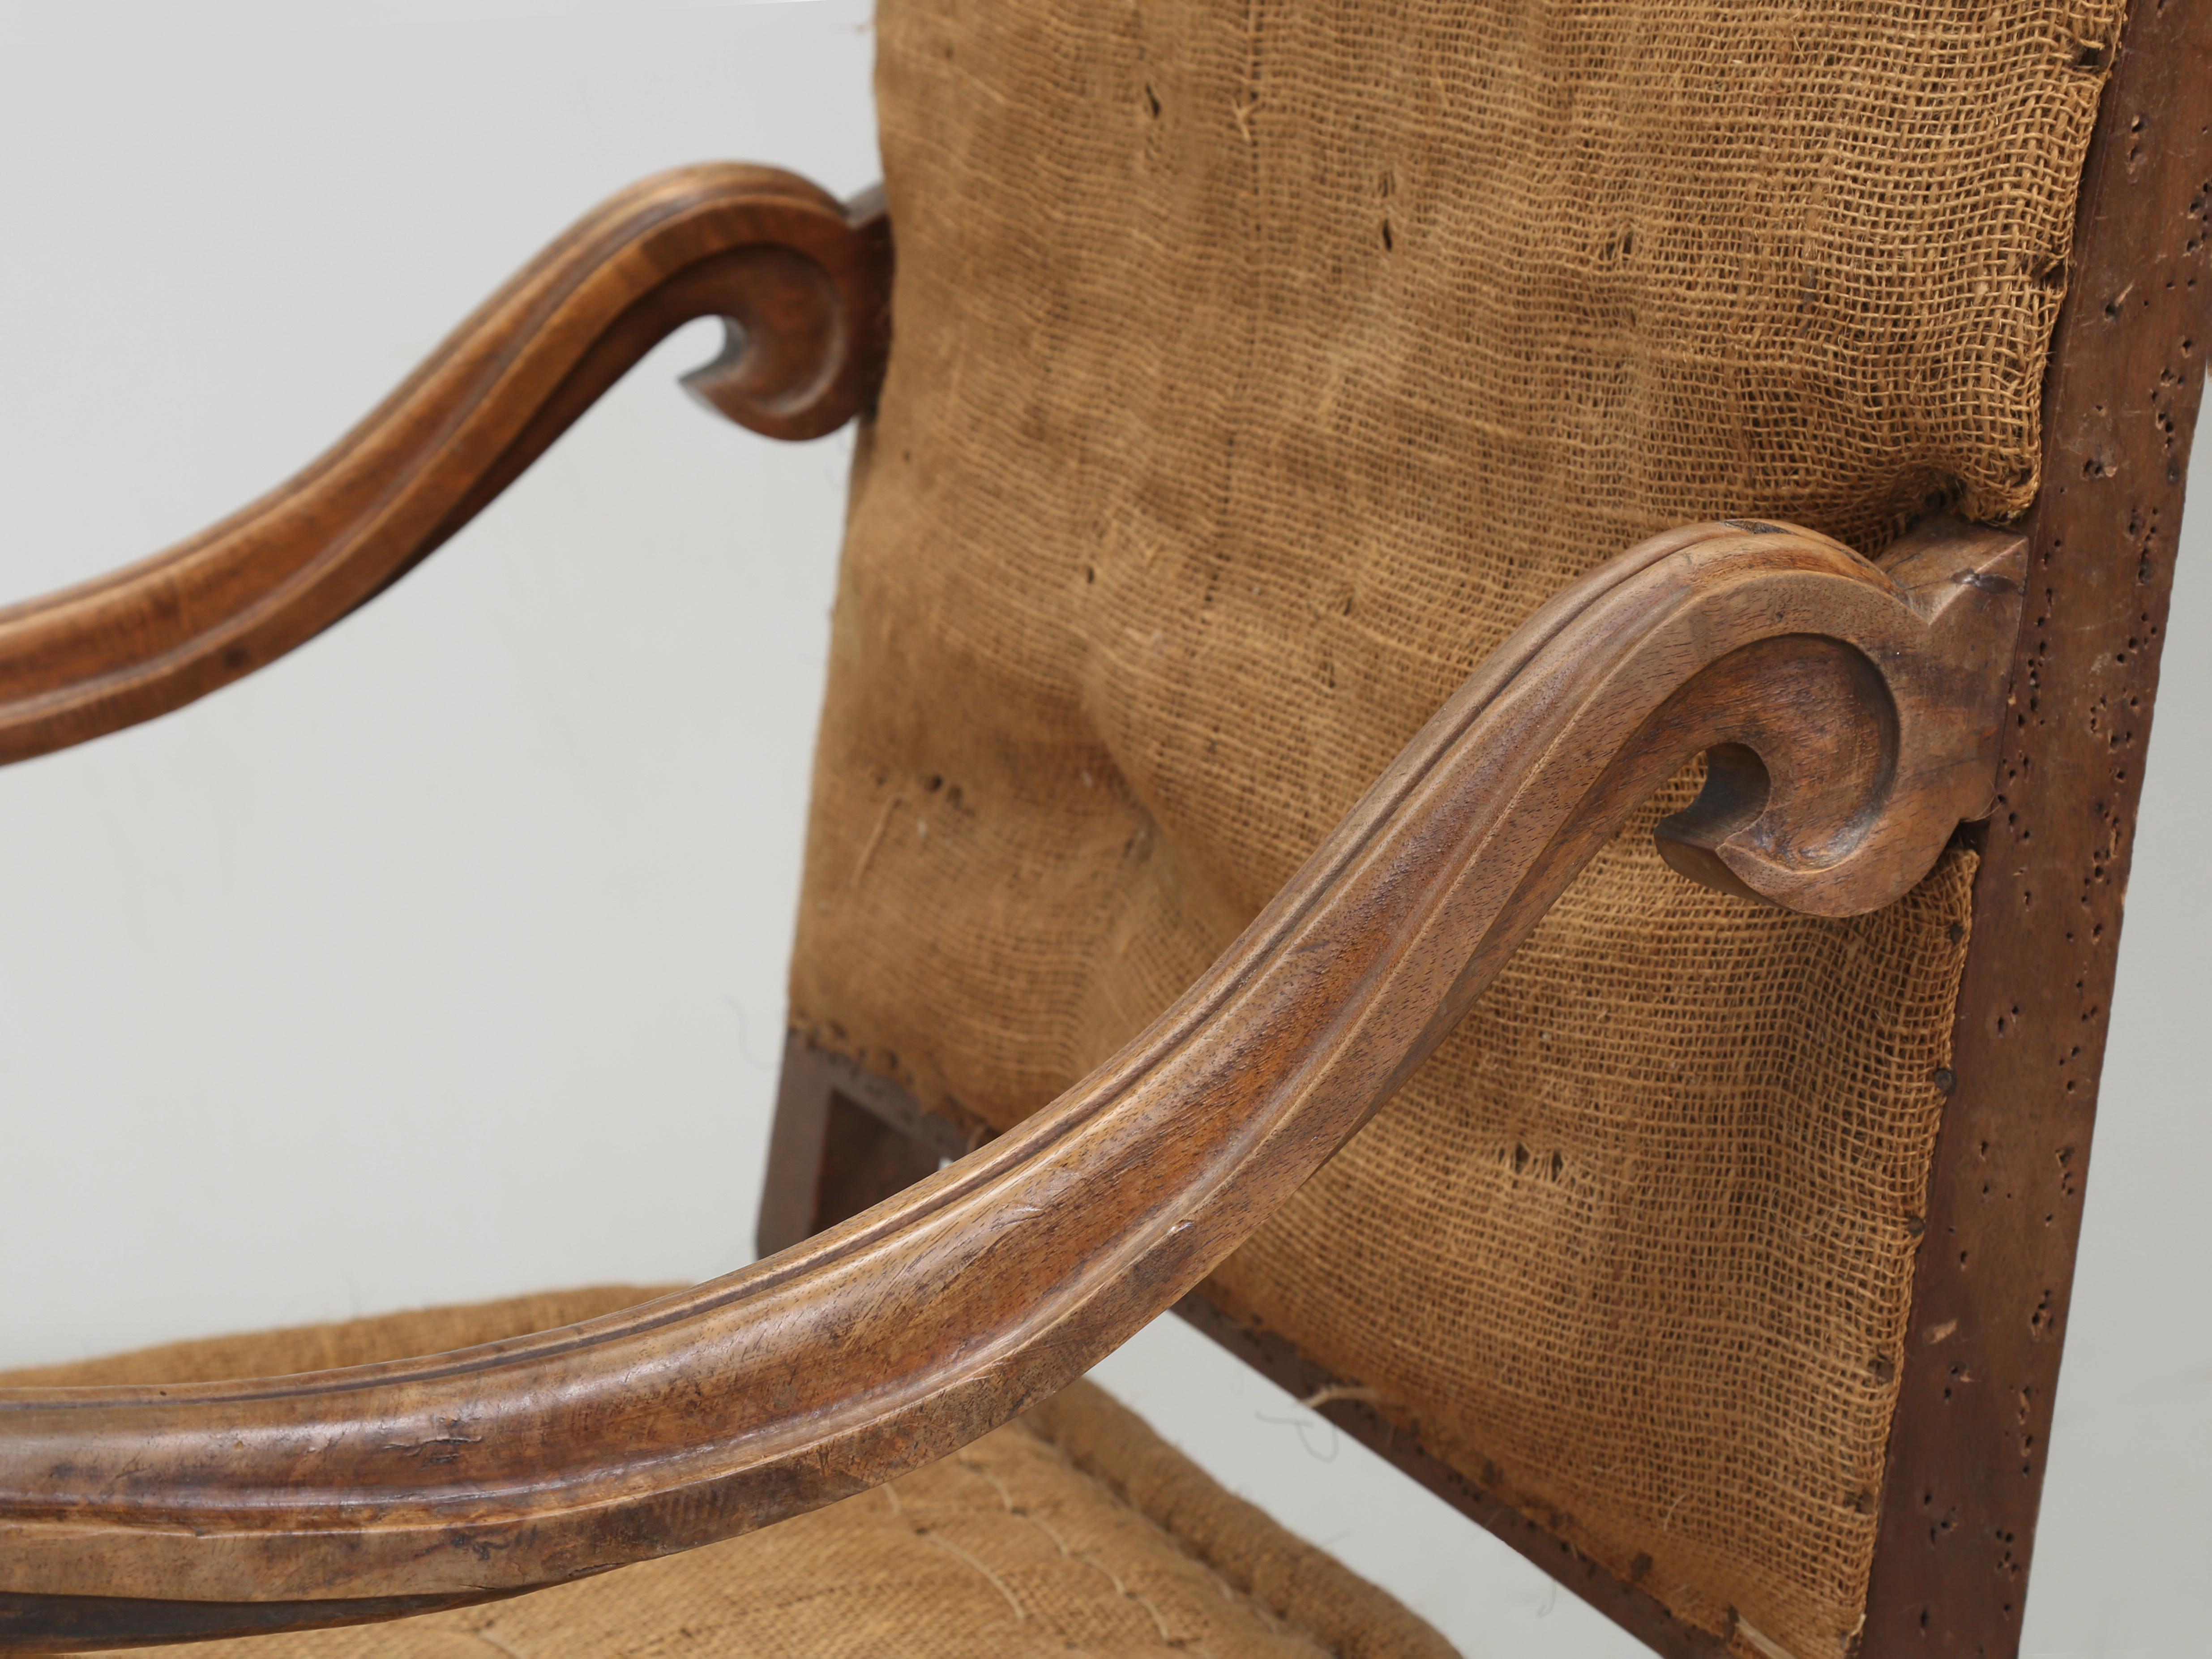 Antique Pair of French Armchairs or sometimes referred to as Throne Chairs in a completely unrestored condition. Whenever we receive a shipment of Antique French Armchairs from France, they virtually always have to be rebuilt from the frame up and